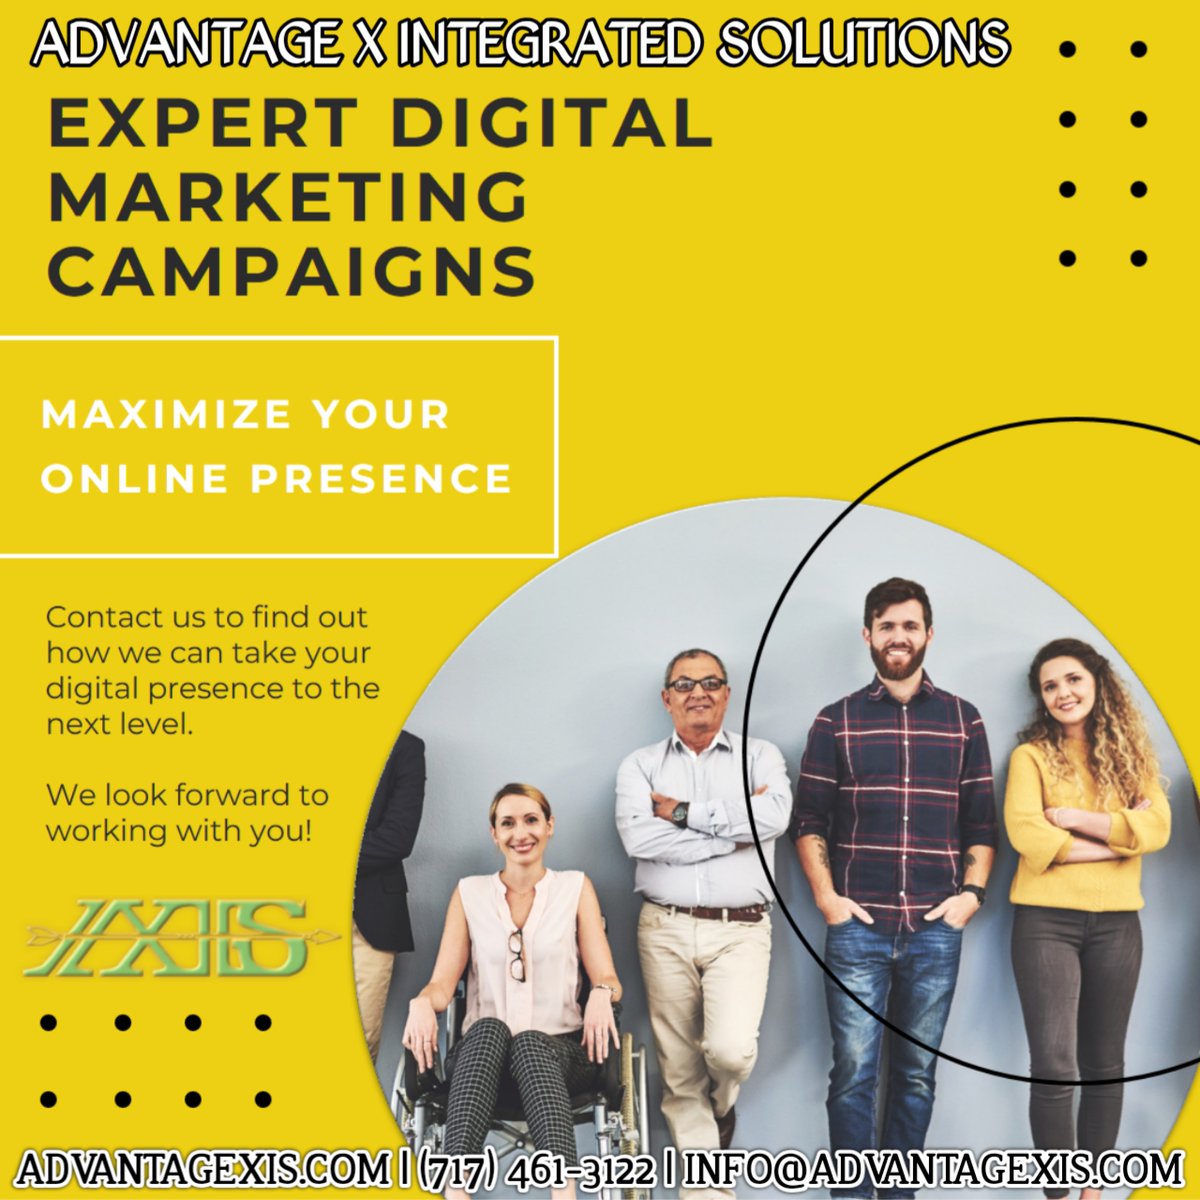 Maximize your online presence with a digital marketing campaign that engages your target audience. Contact us or visit bit.ly/3kNy4mm for more info! #digitalmarketingcampaign #targetaudience #webpresence #webbasedmarketing #marketingservices #universalmessage #marketing